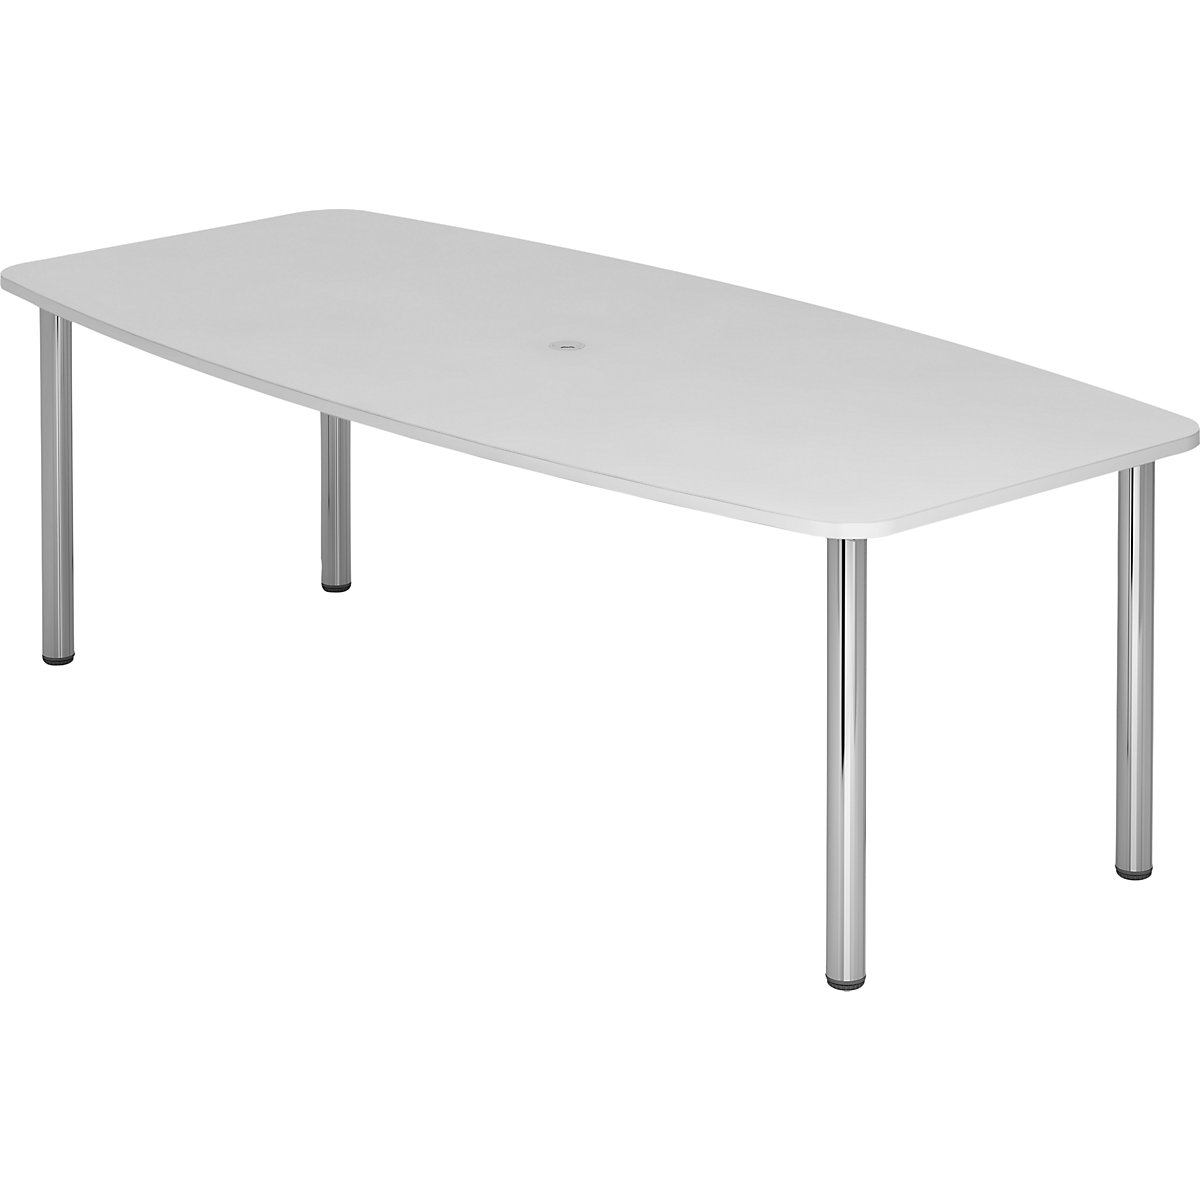 Conference table, frame with round tubular legs, for 8 people, light grey-6